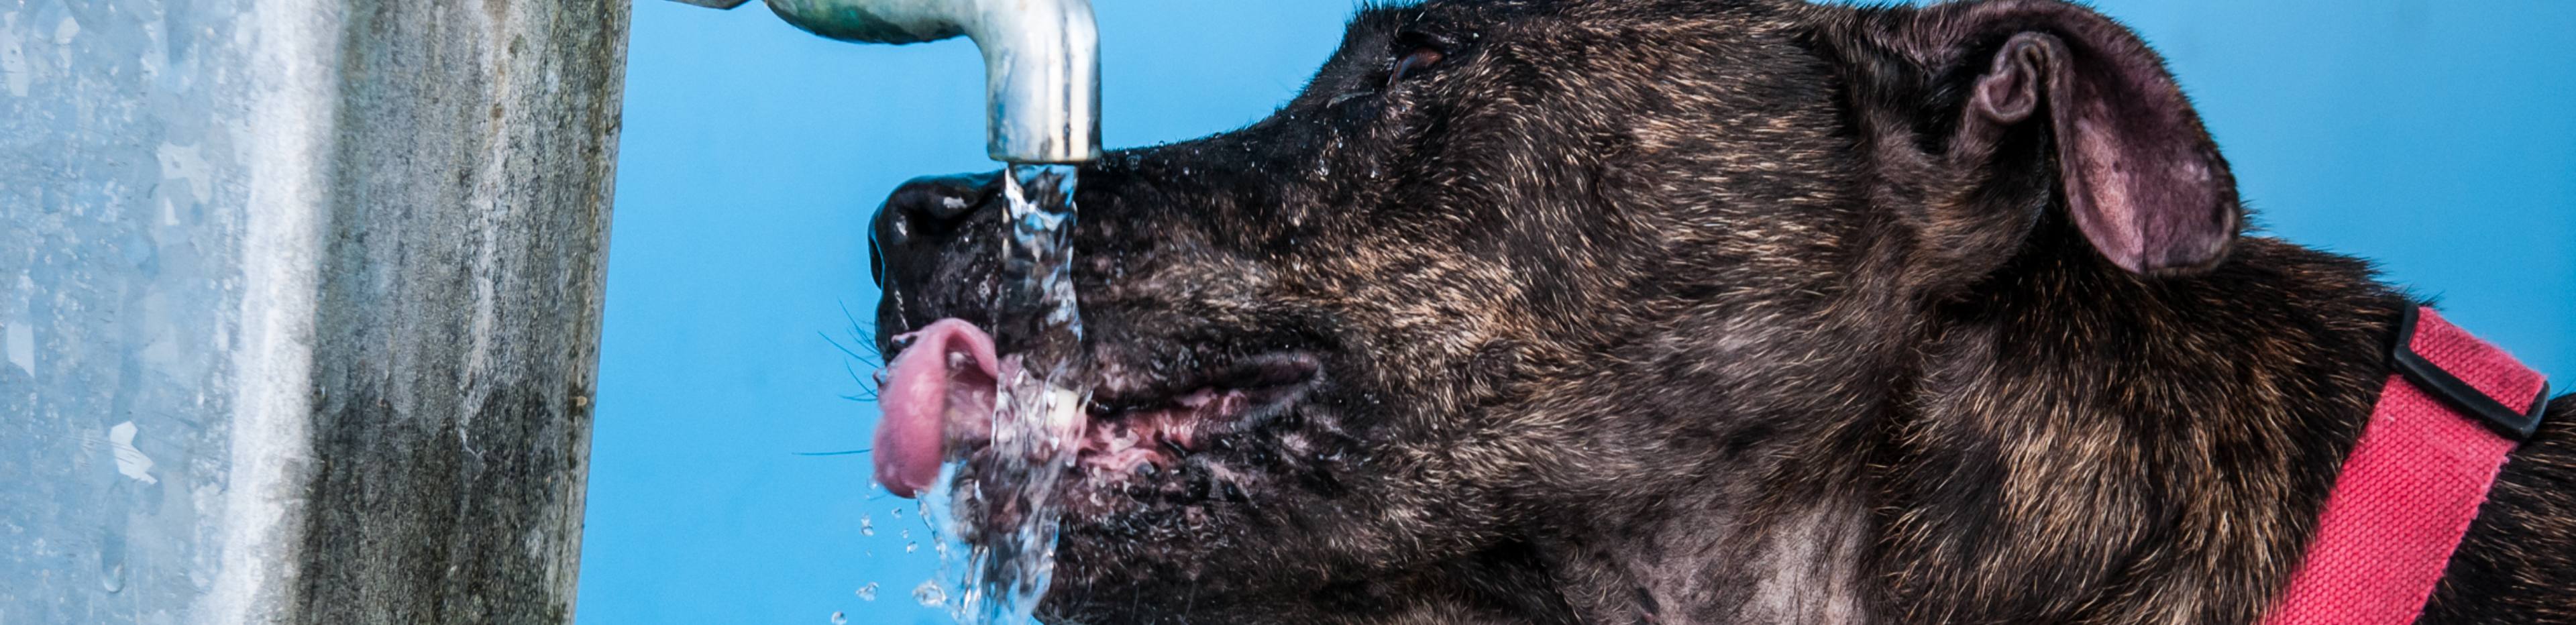 dog drinking water from tap